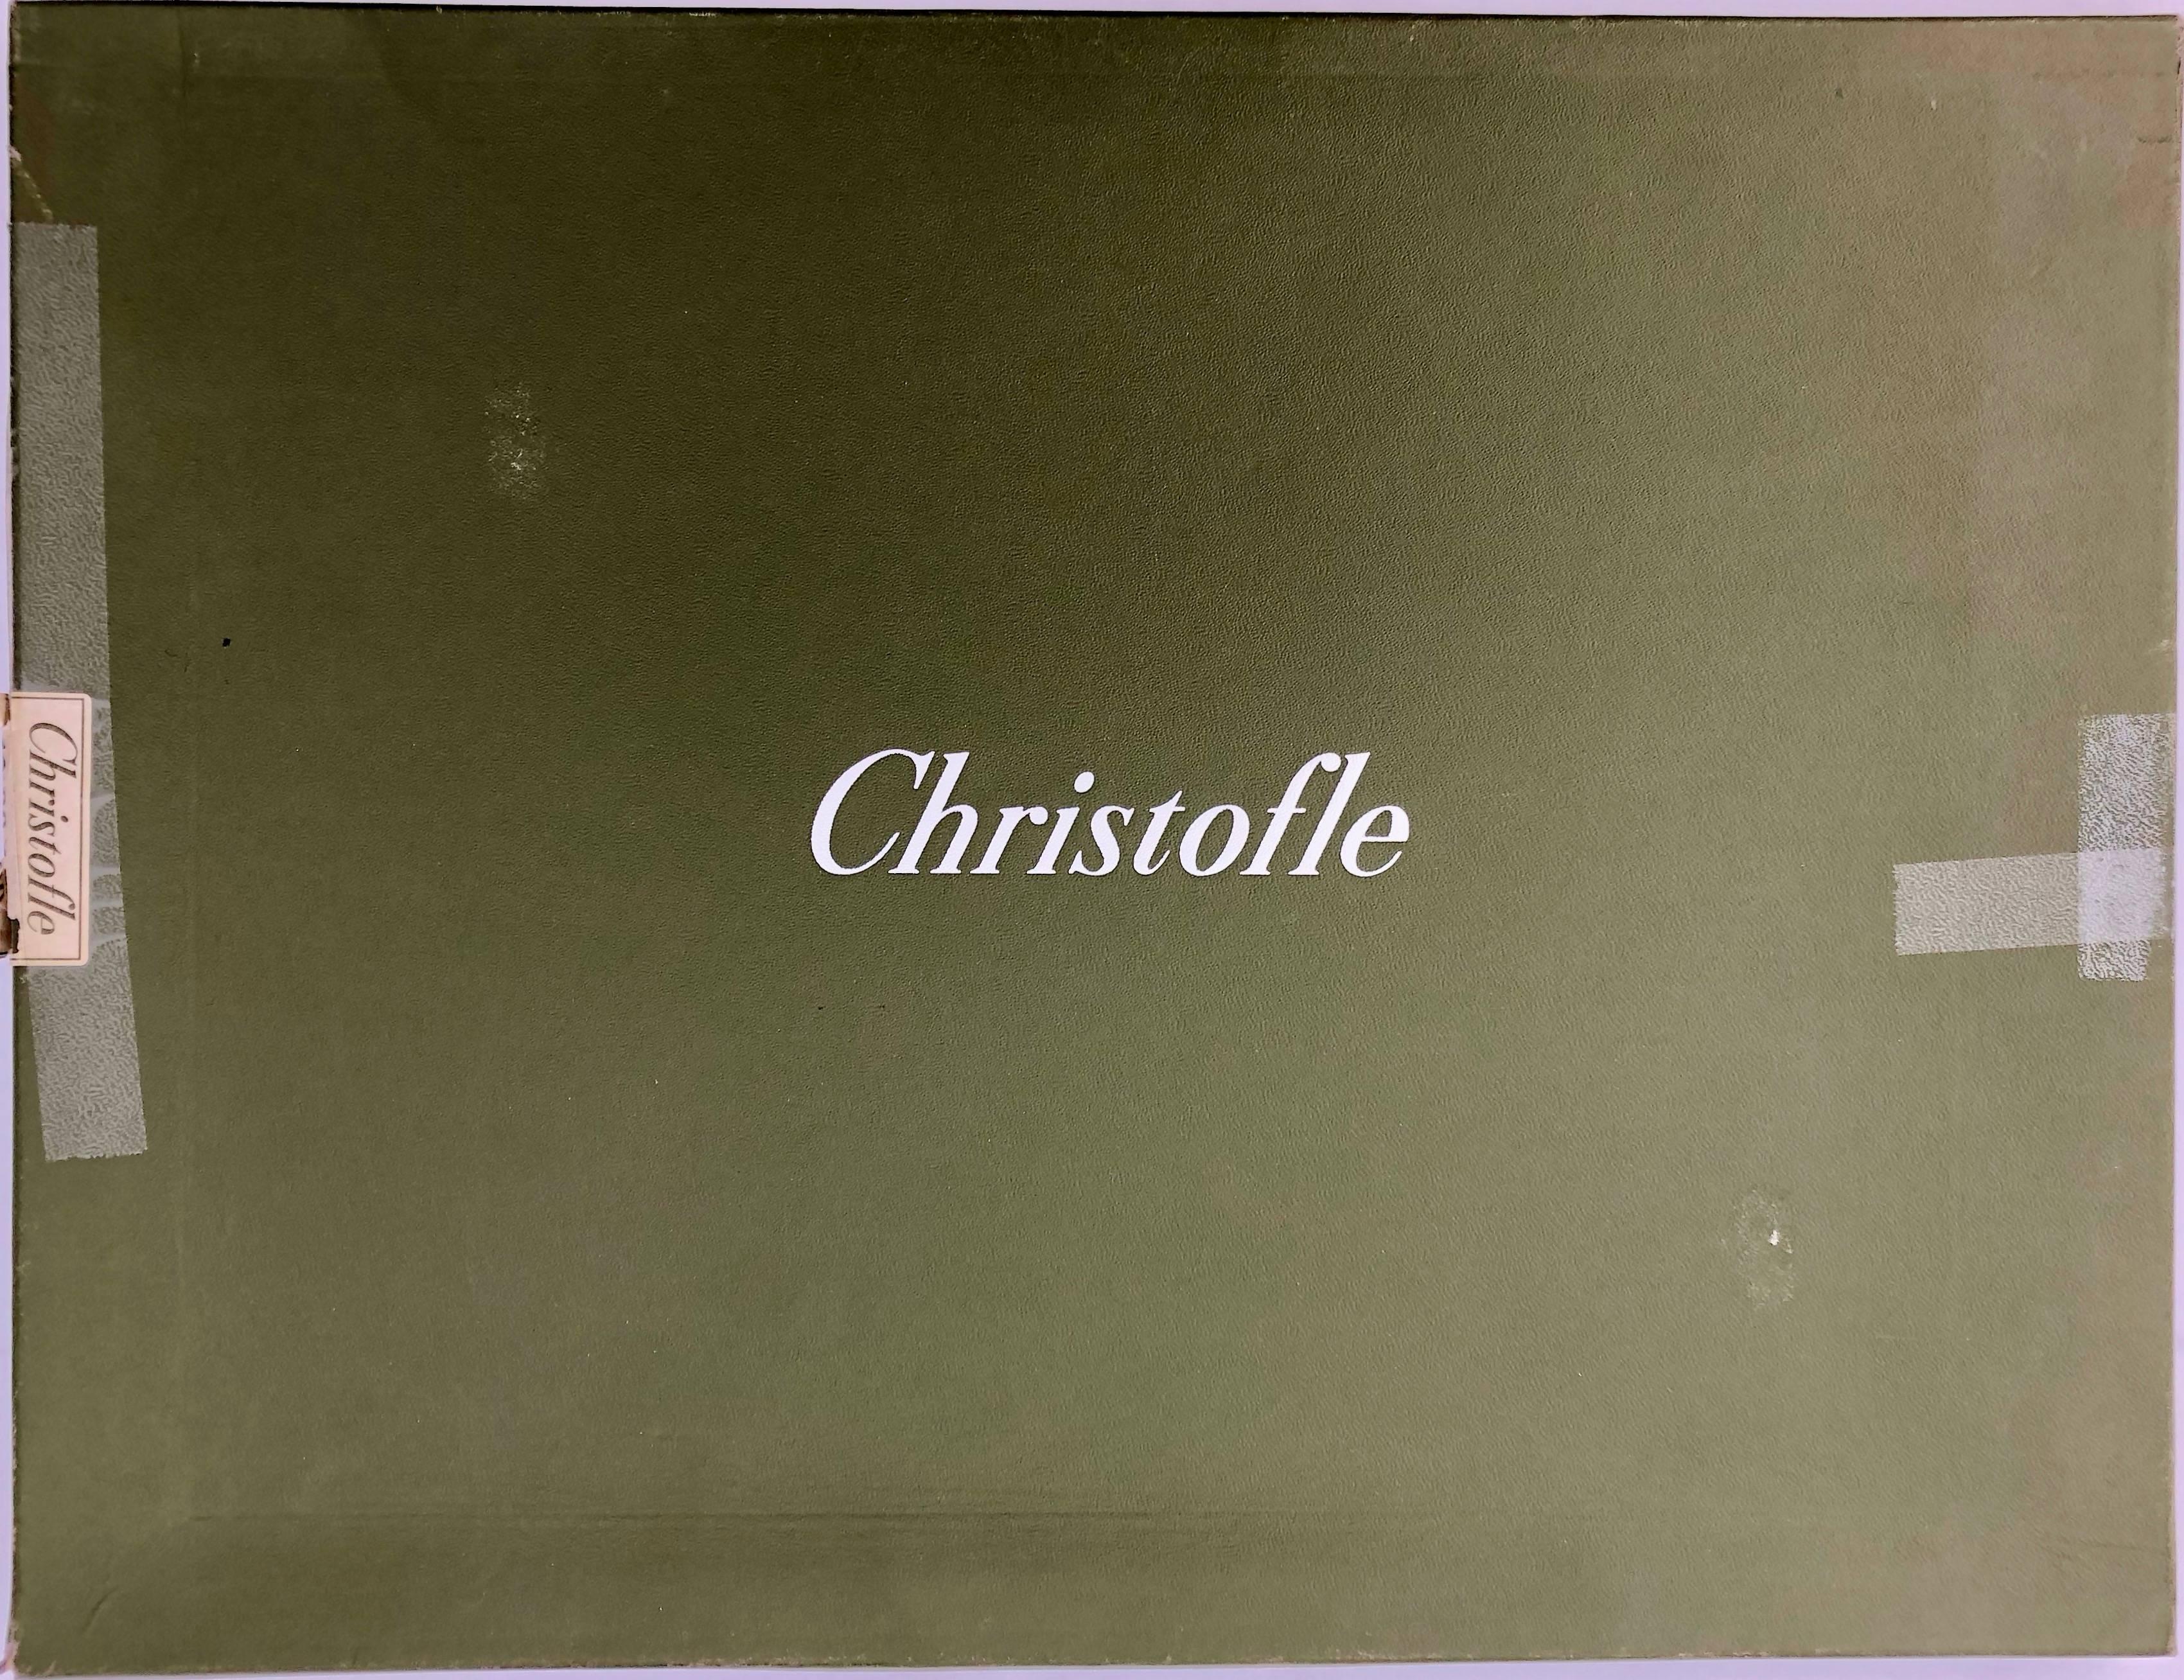 20th Century Christofle Silver Plated Rectangular Tray, Model Albi Bagatelle, in It's Box